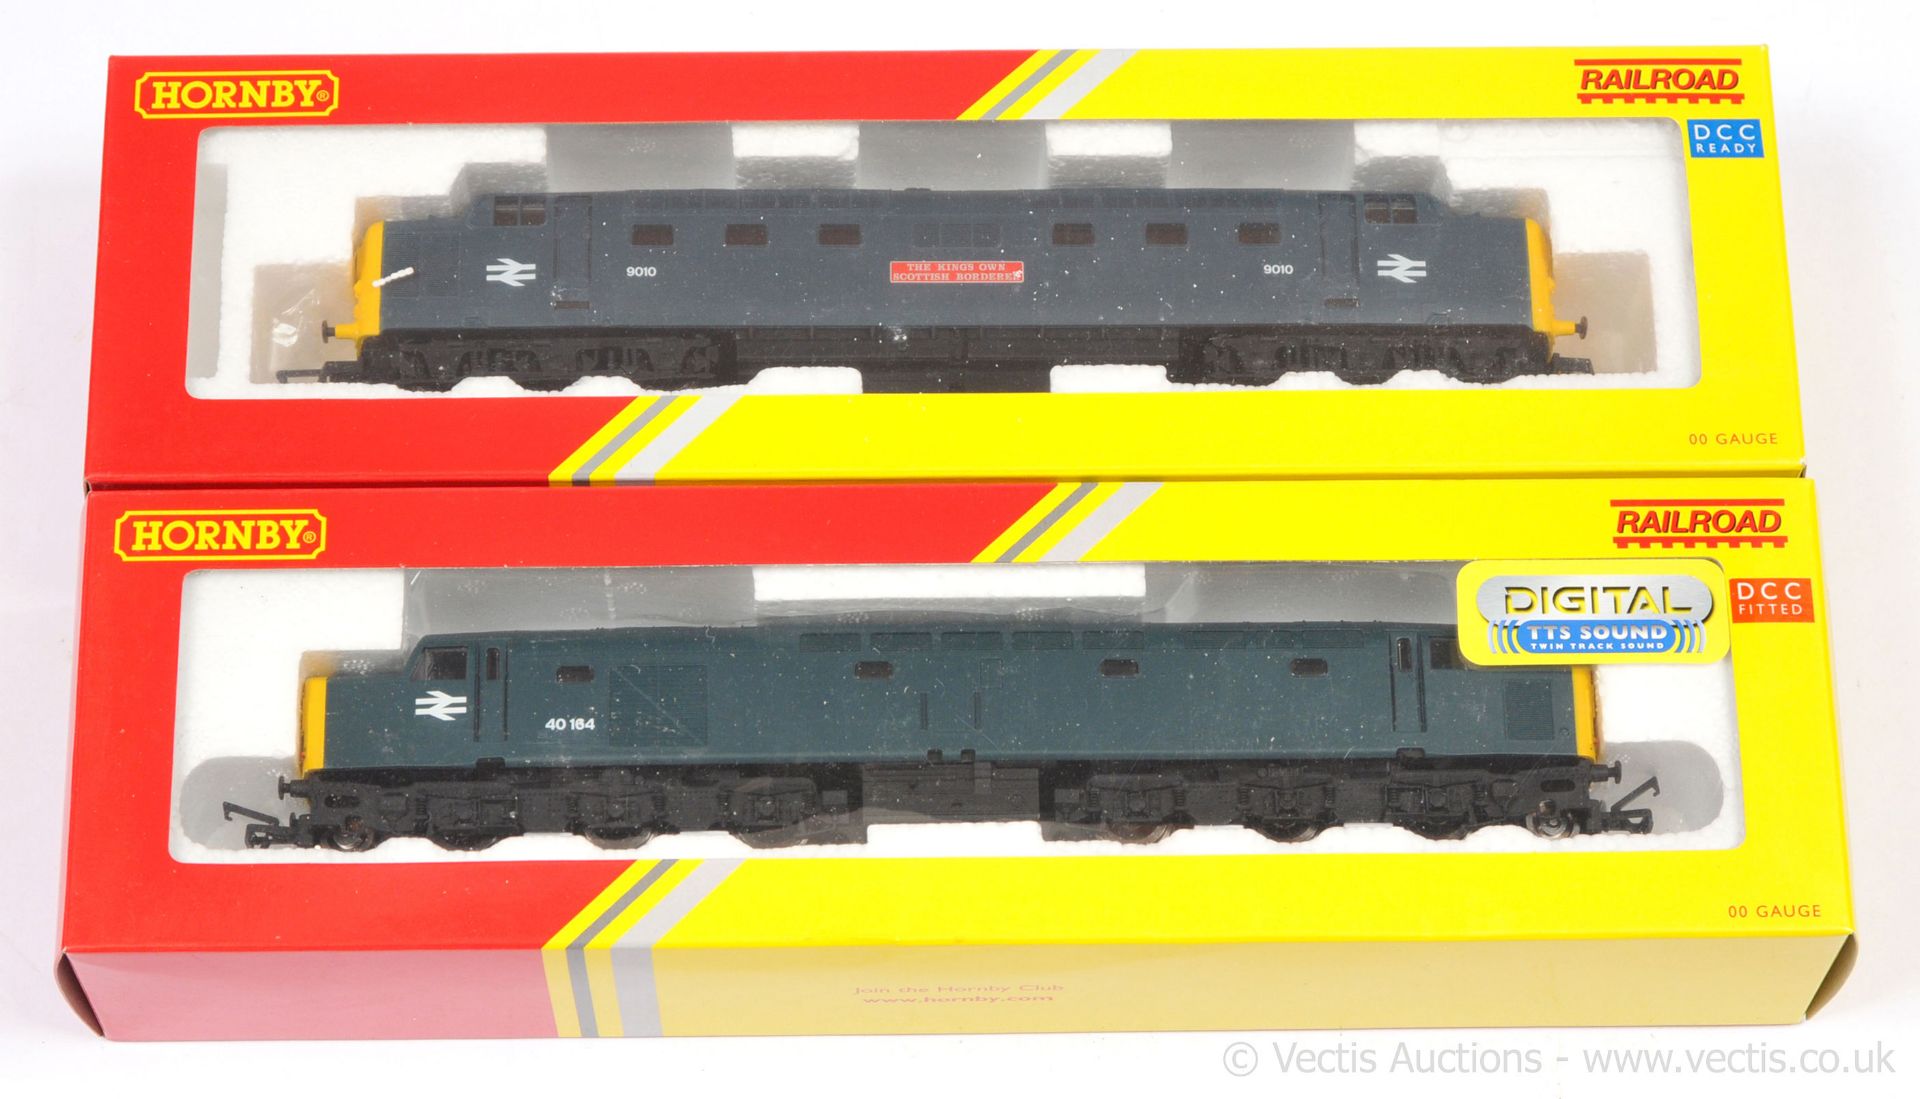 PAIR inc Hornby (China) Railroad issue BR blue